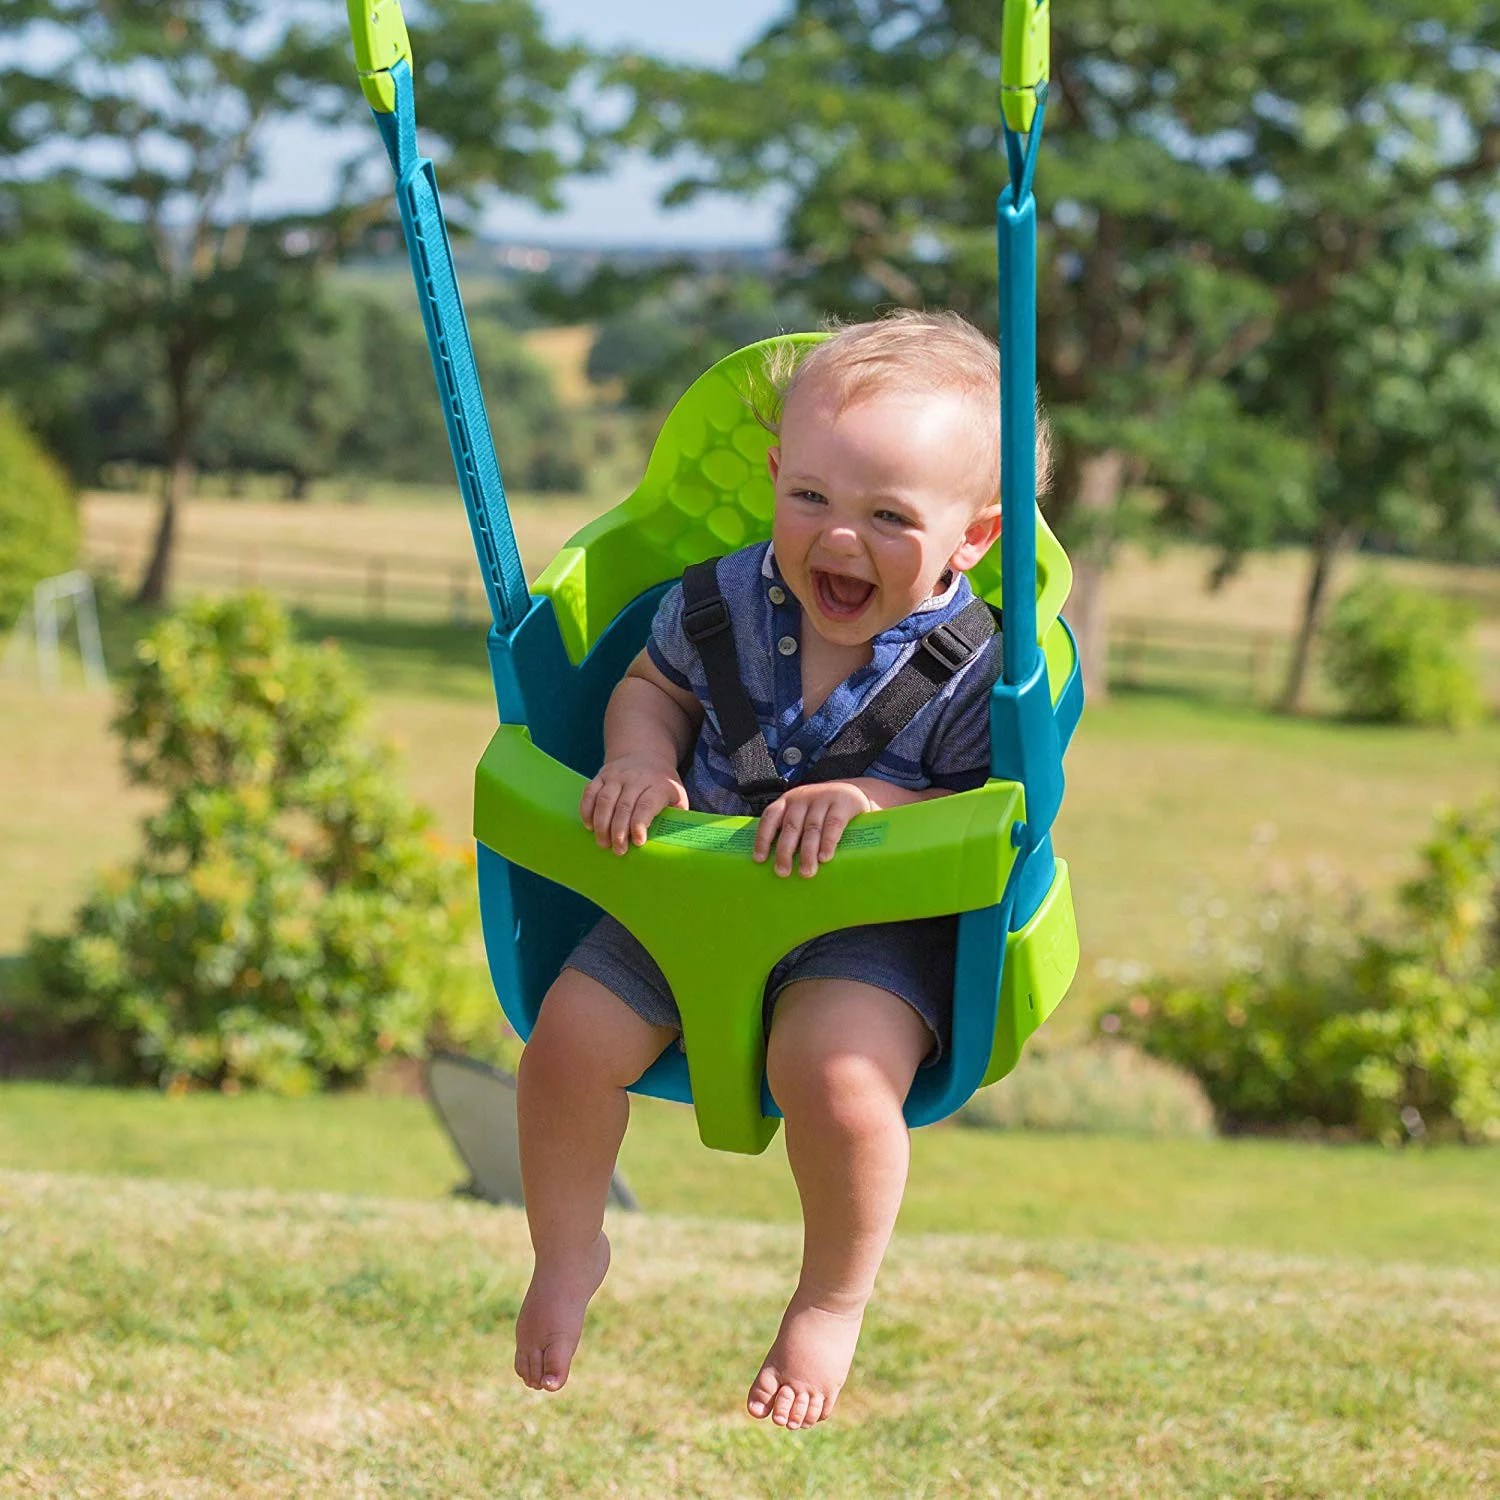 Best Outdoor Baby Swing Top 5 Models Your Child Will Love Which to buy?